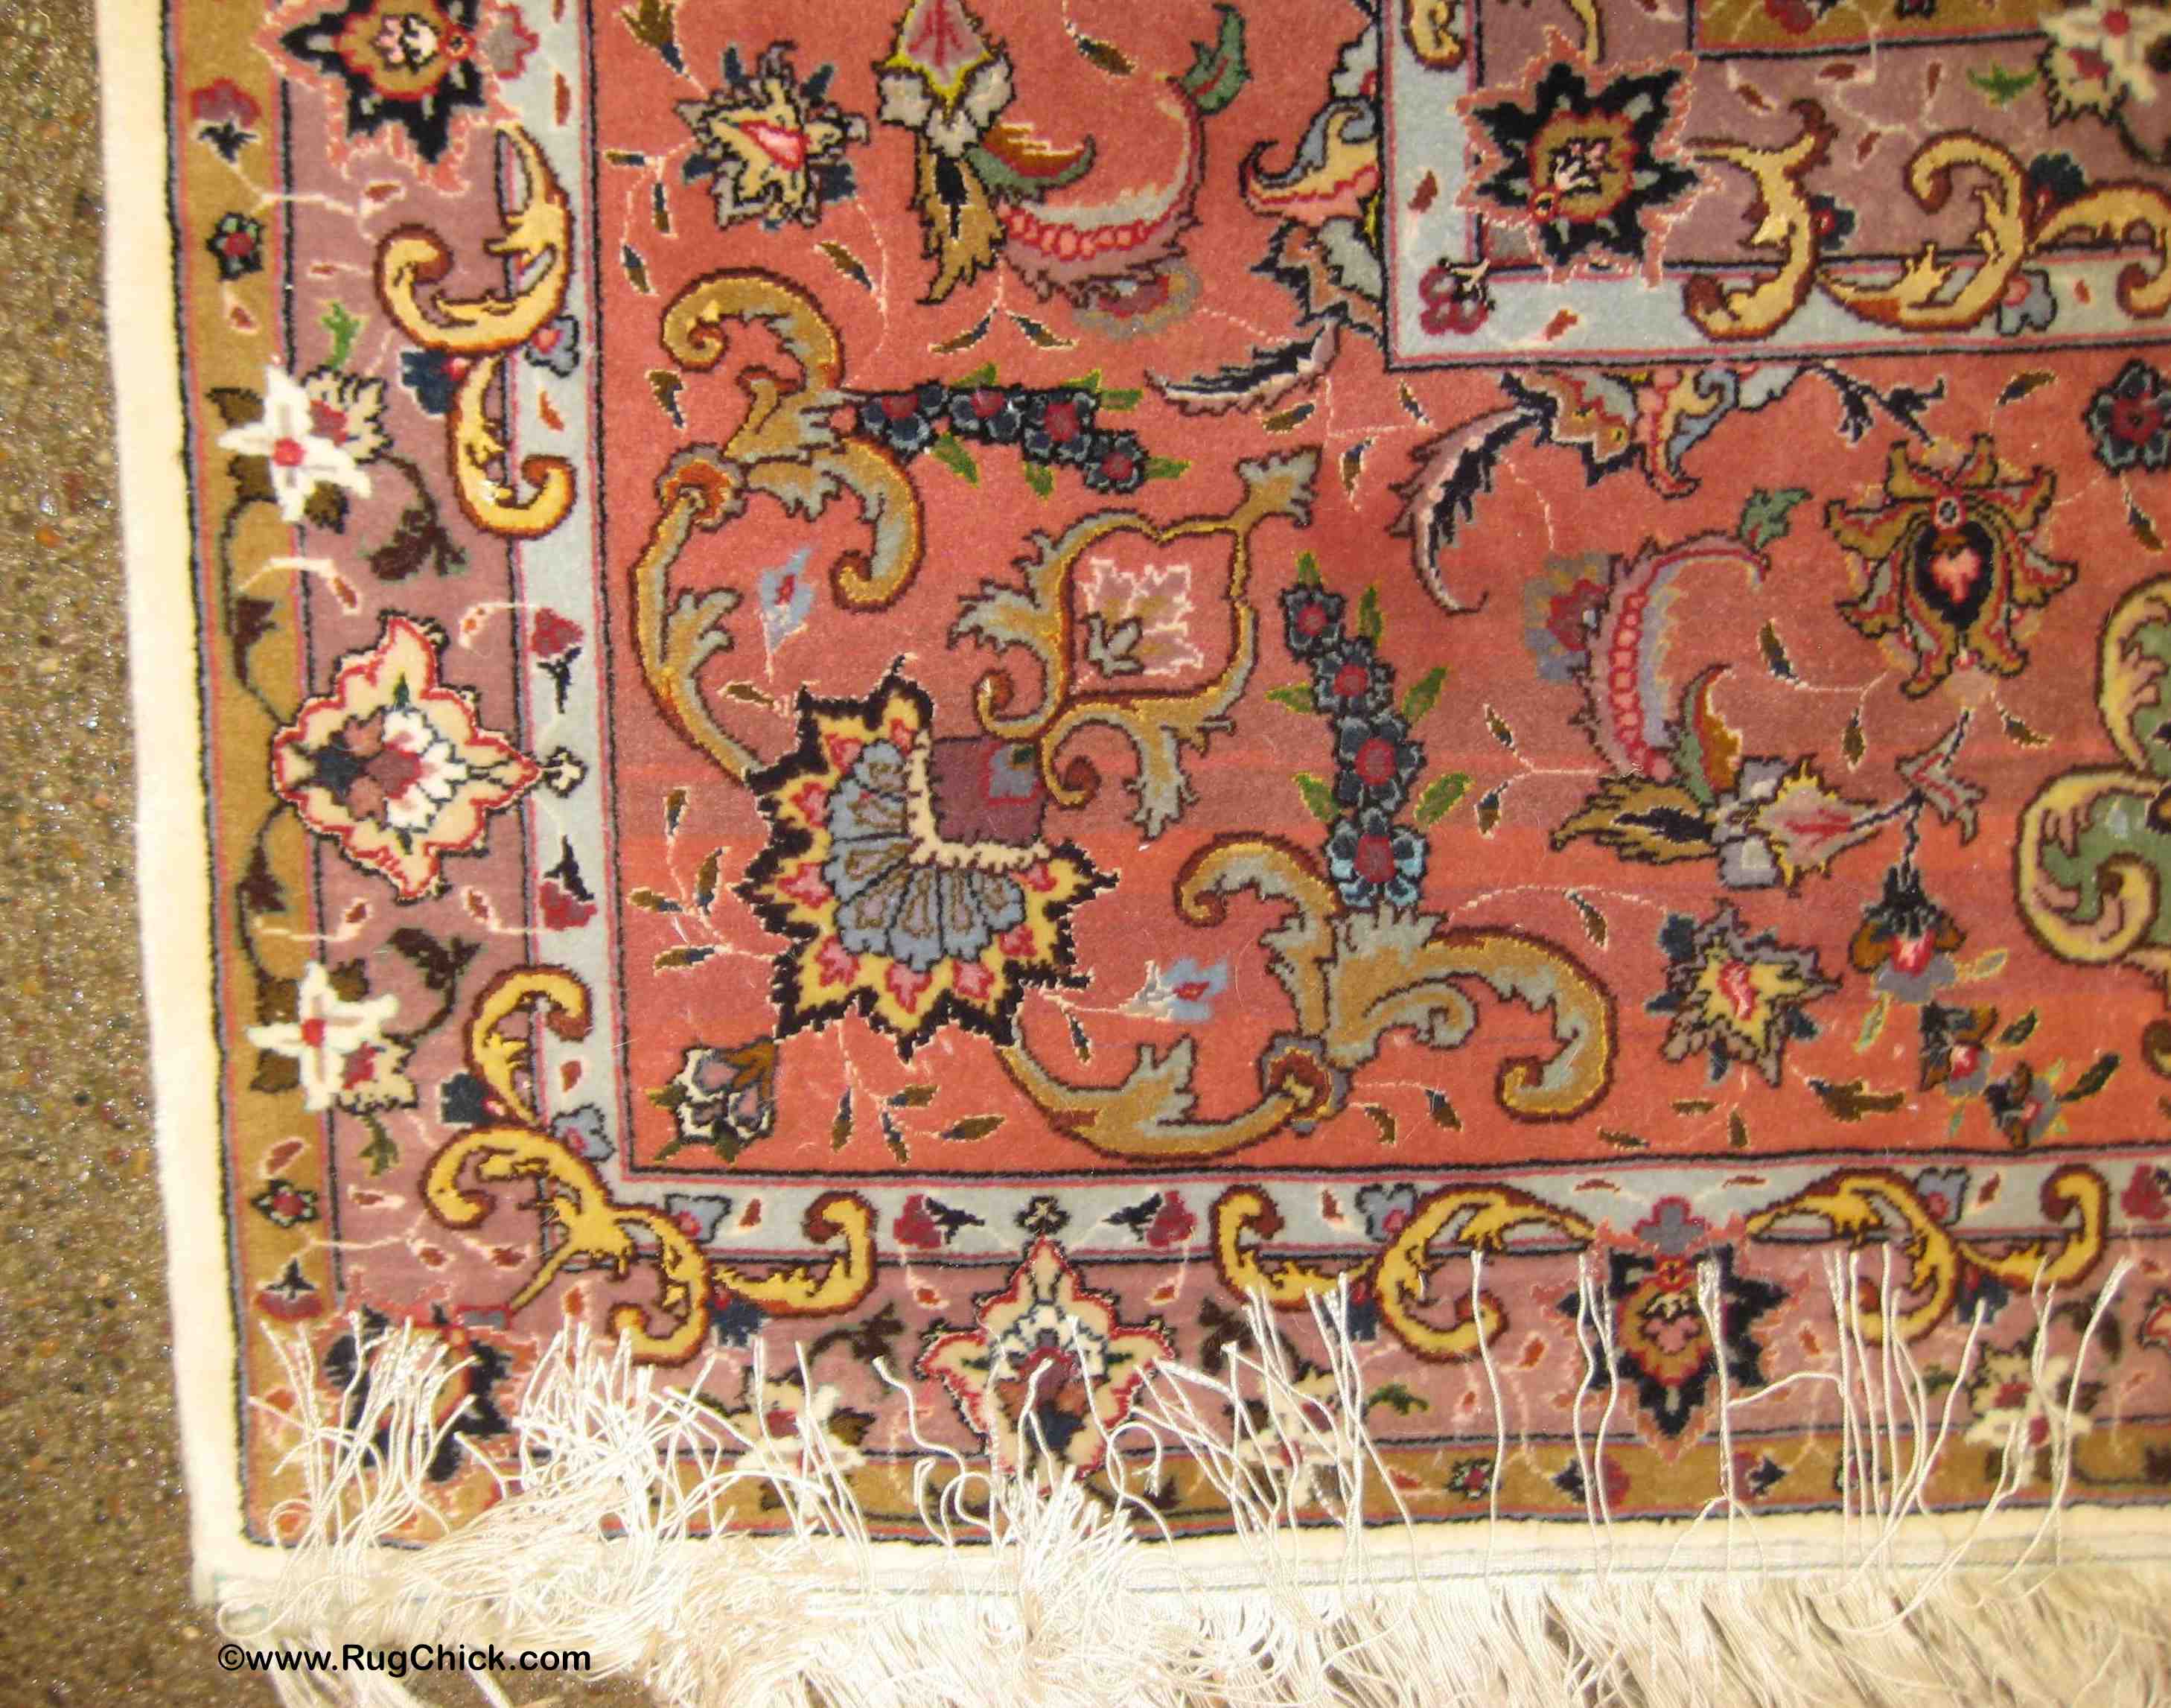 Synthetic Rugs What You Need To, How To Tell If A Rug Is Wool Or Polyester